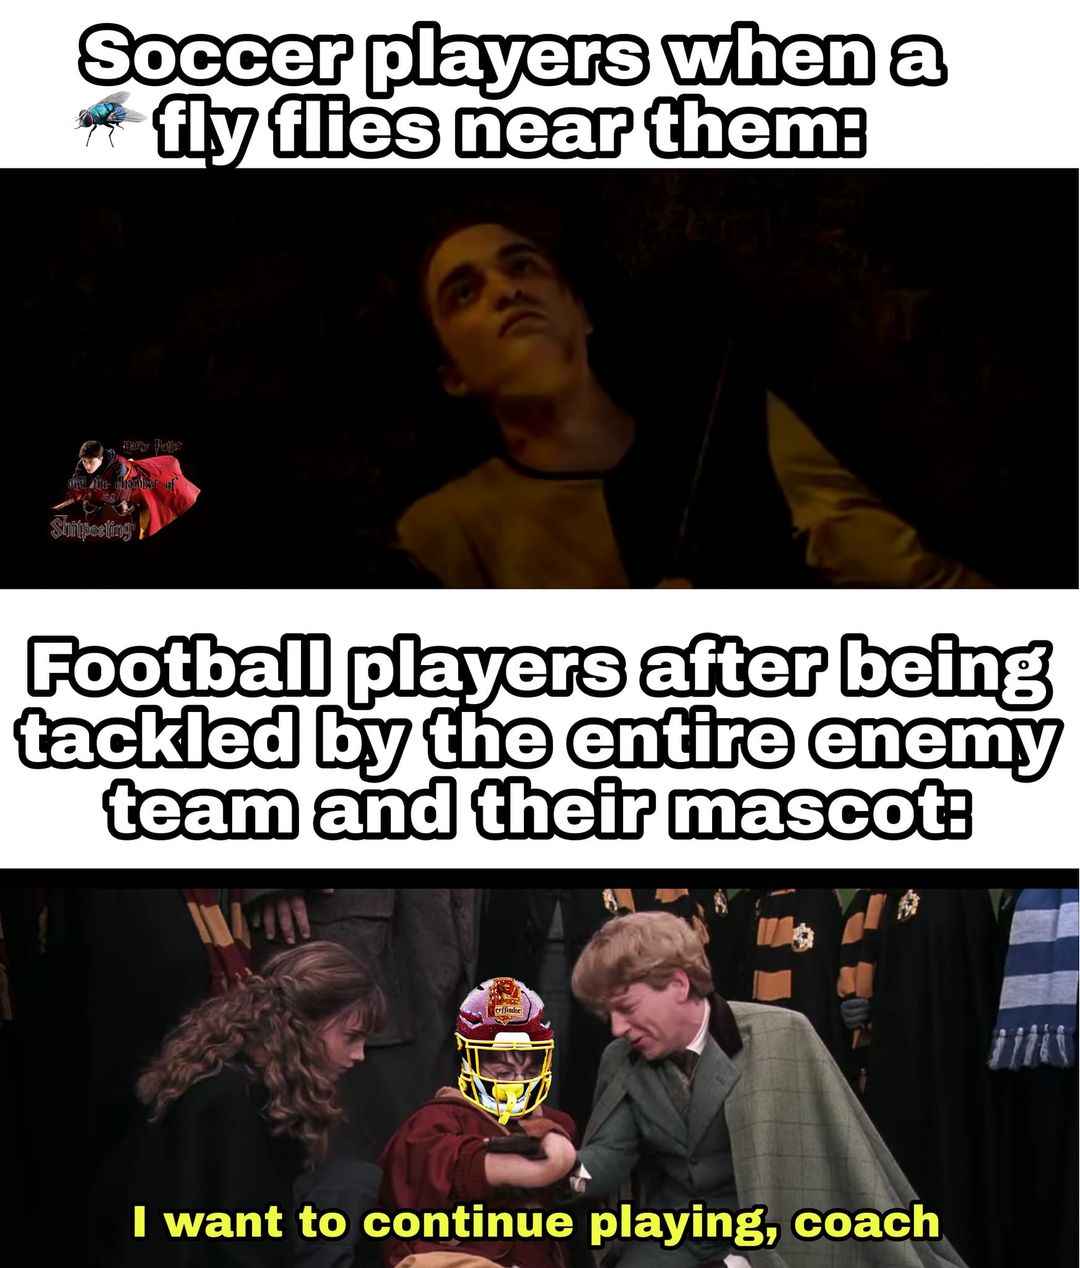 Harry Potter memes - photoshoop - Soccer players when a fly flies near them Shitposting Football players after being tackled by the entire enemy team and their mascot I want to continue playing, coach